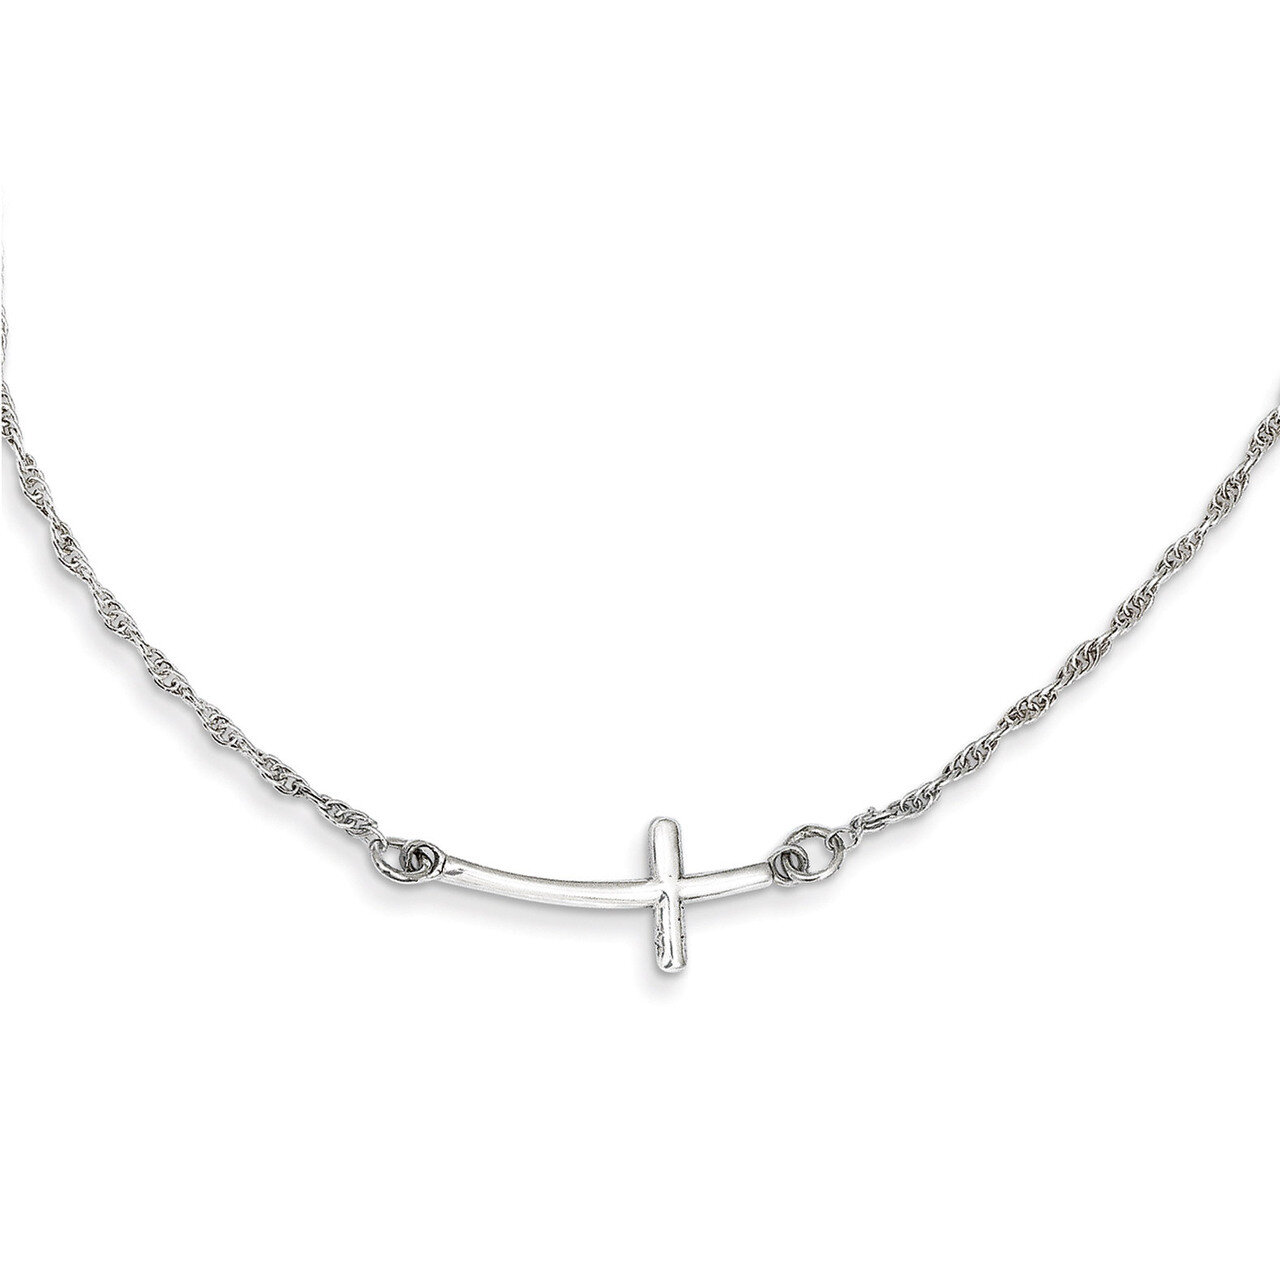 Small Sideways Curved Cross Necklace Sterling Silver QG3462-18